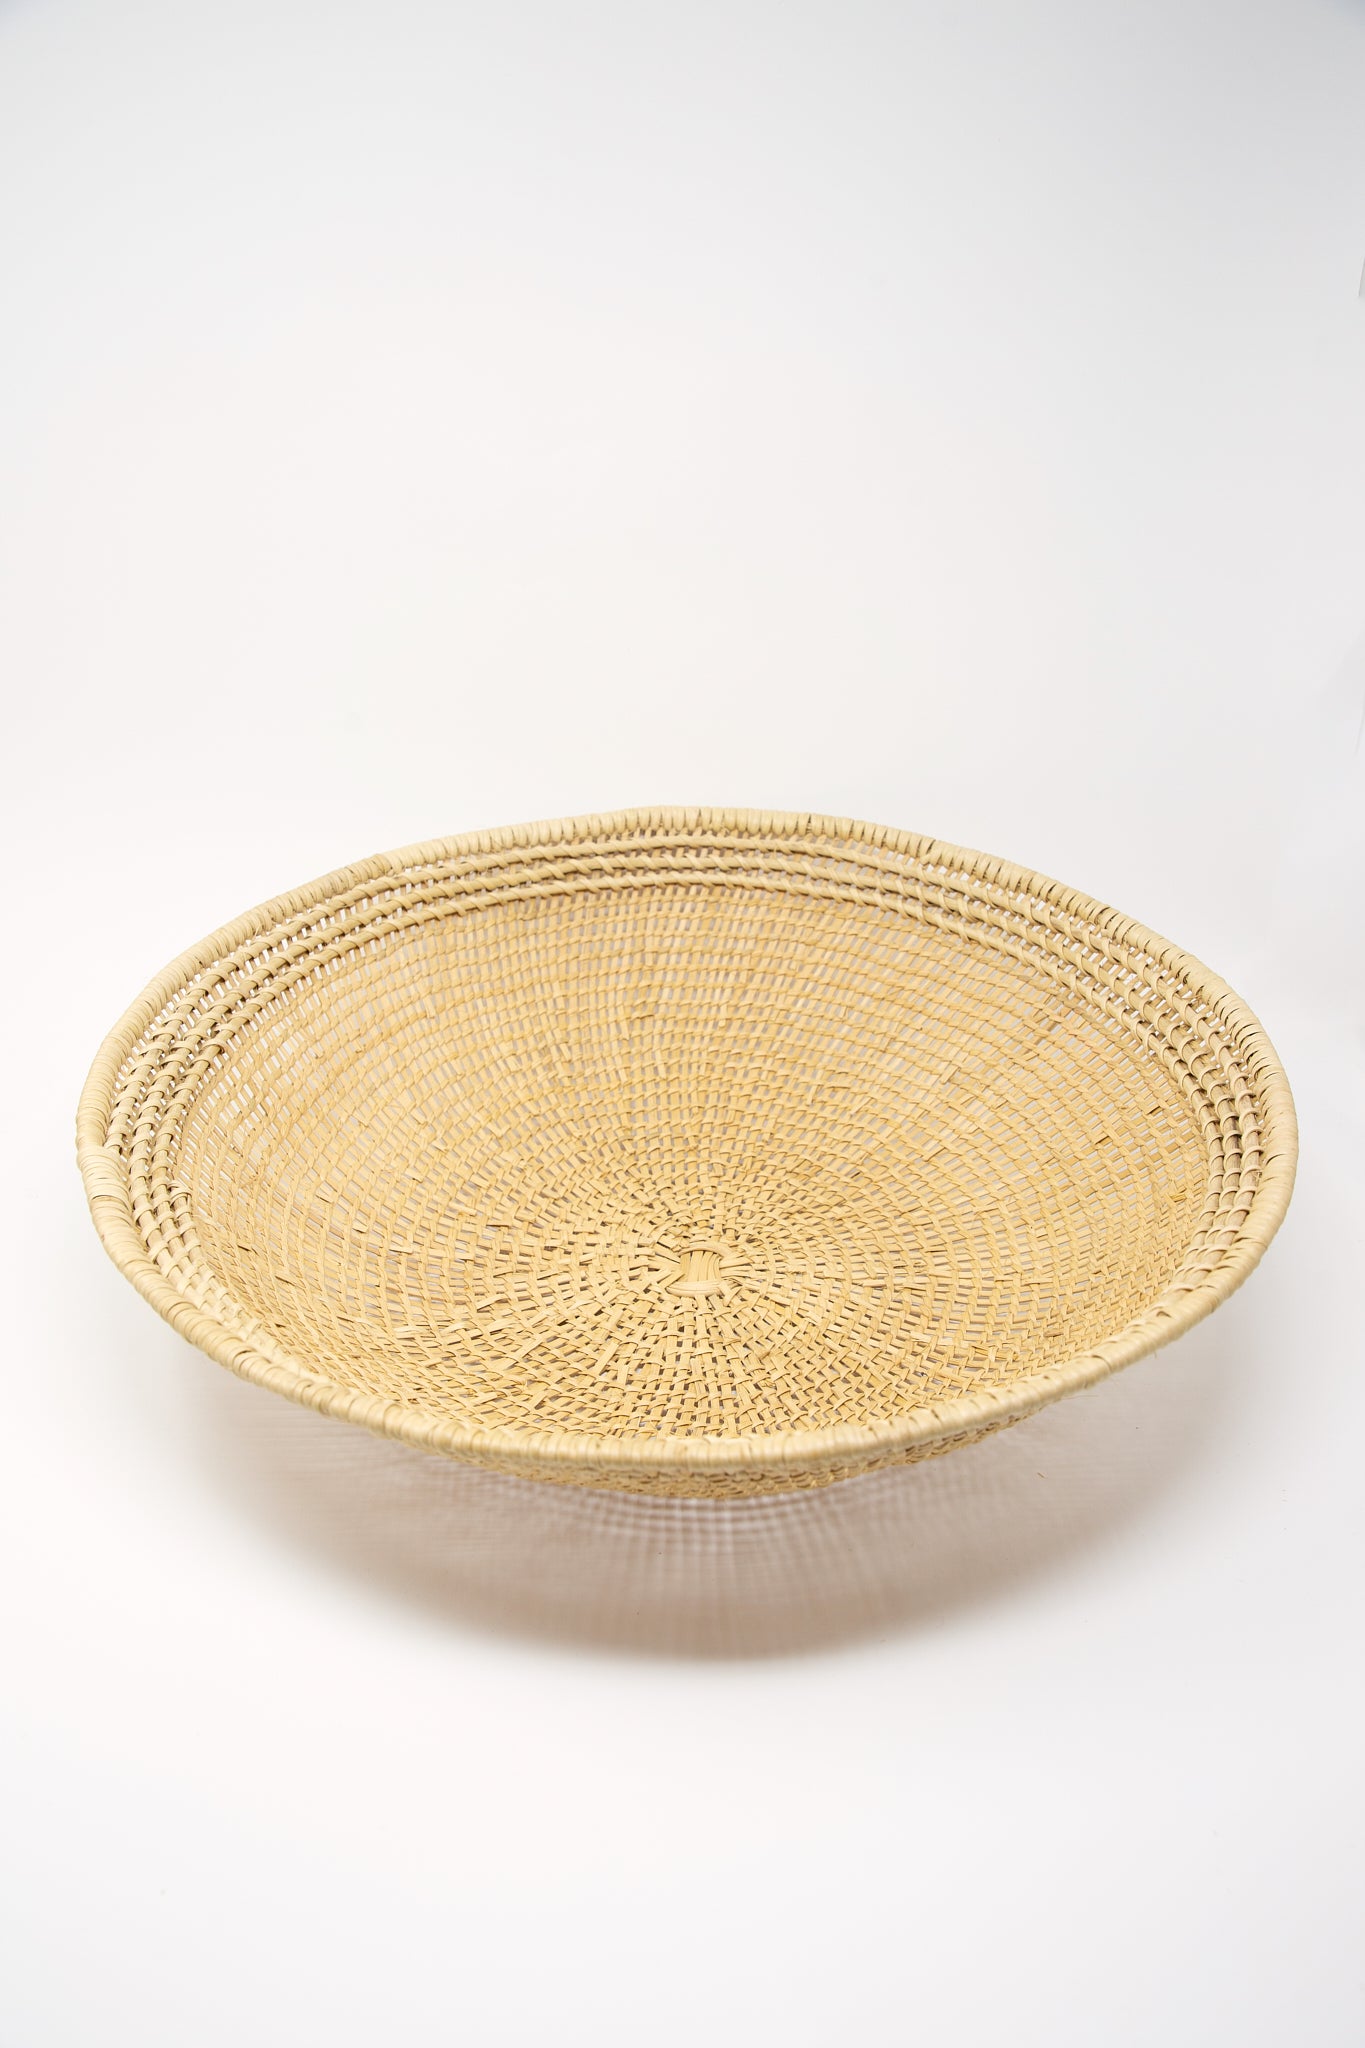 A Plaza Bolivar XL Avia Pova Basket, crafted using traditional basket weaving techniques, displayed on a white background.